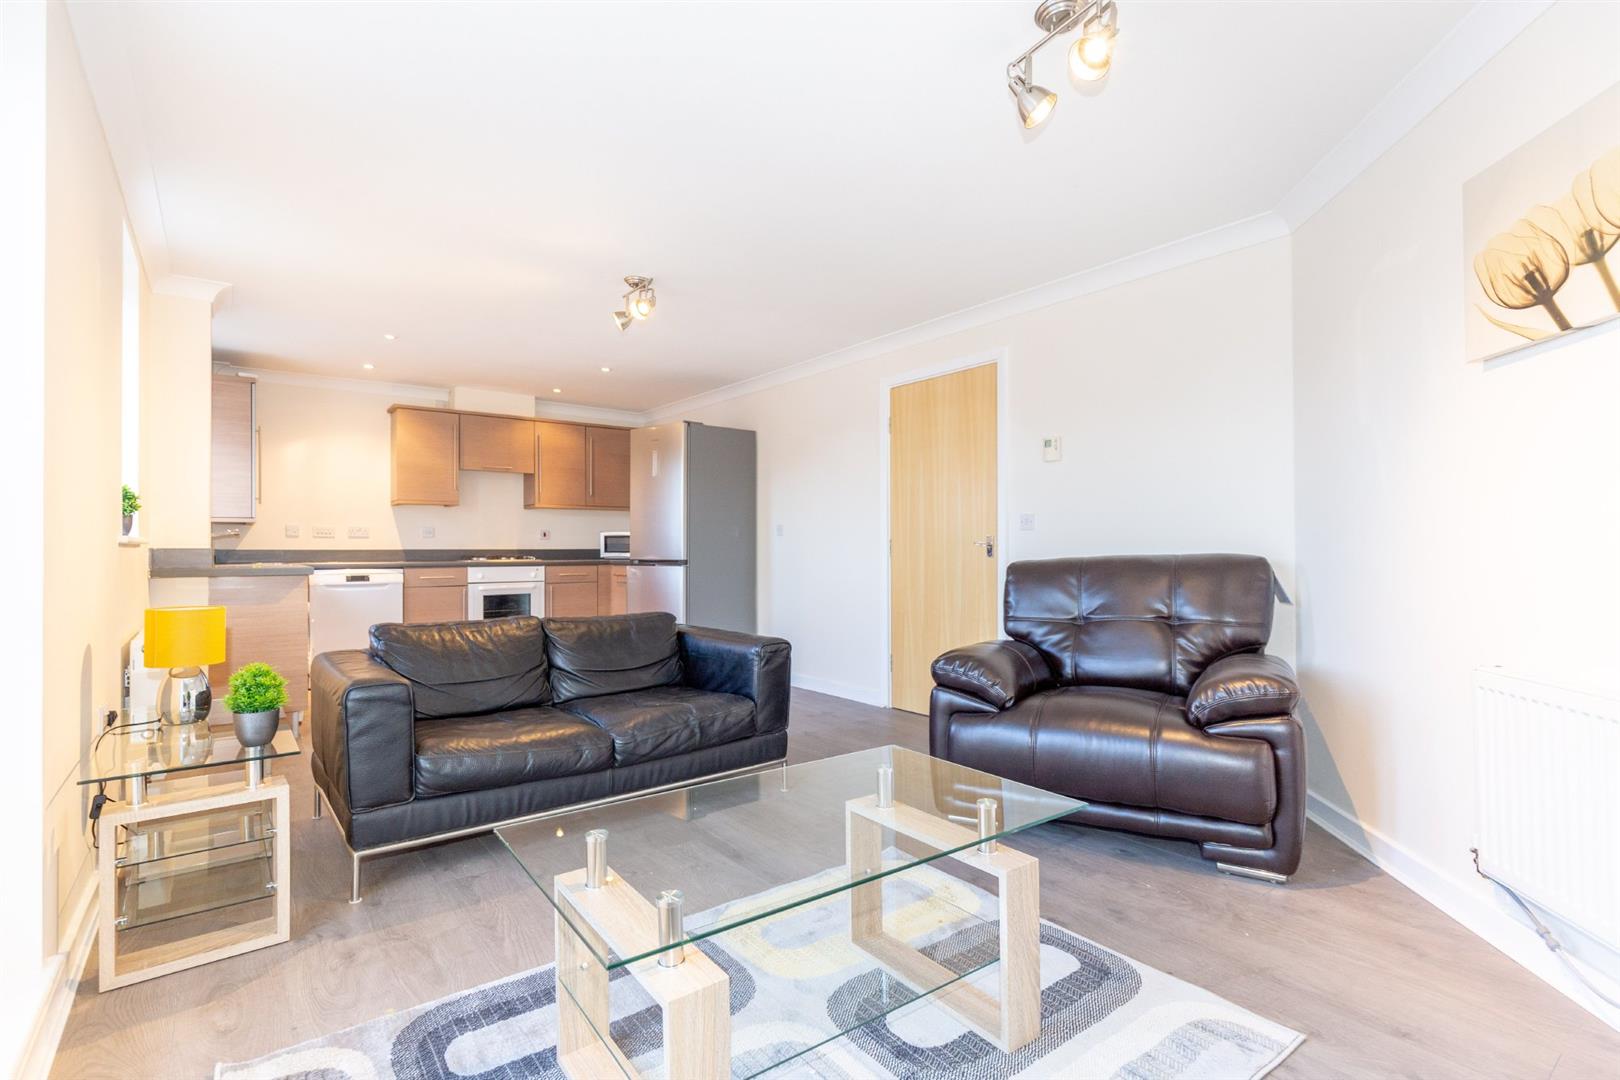 2 bed apartment to rent in Chillingham Road, Heaton - Property Image 1